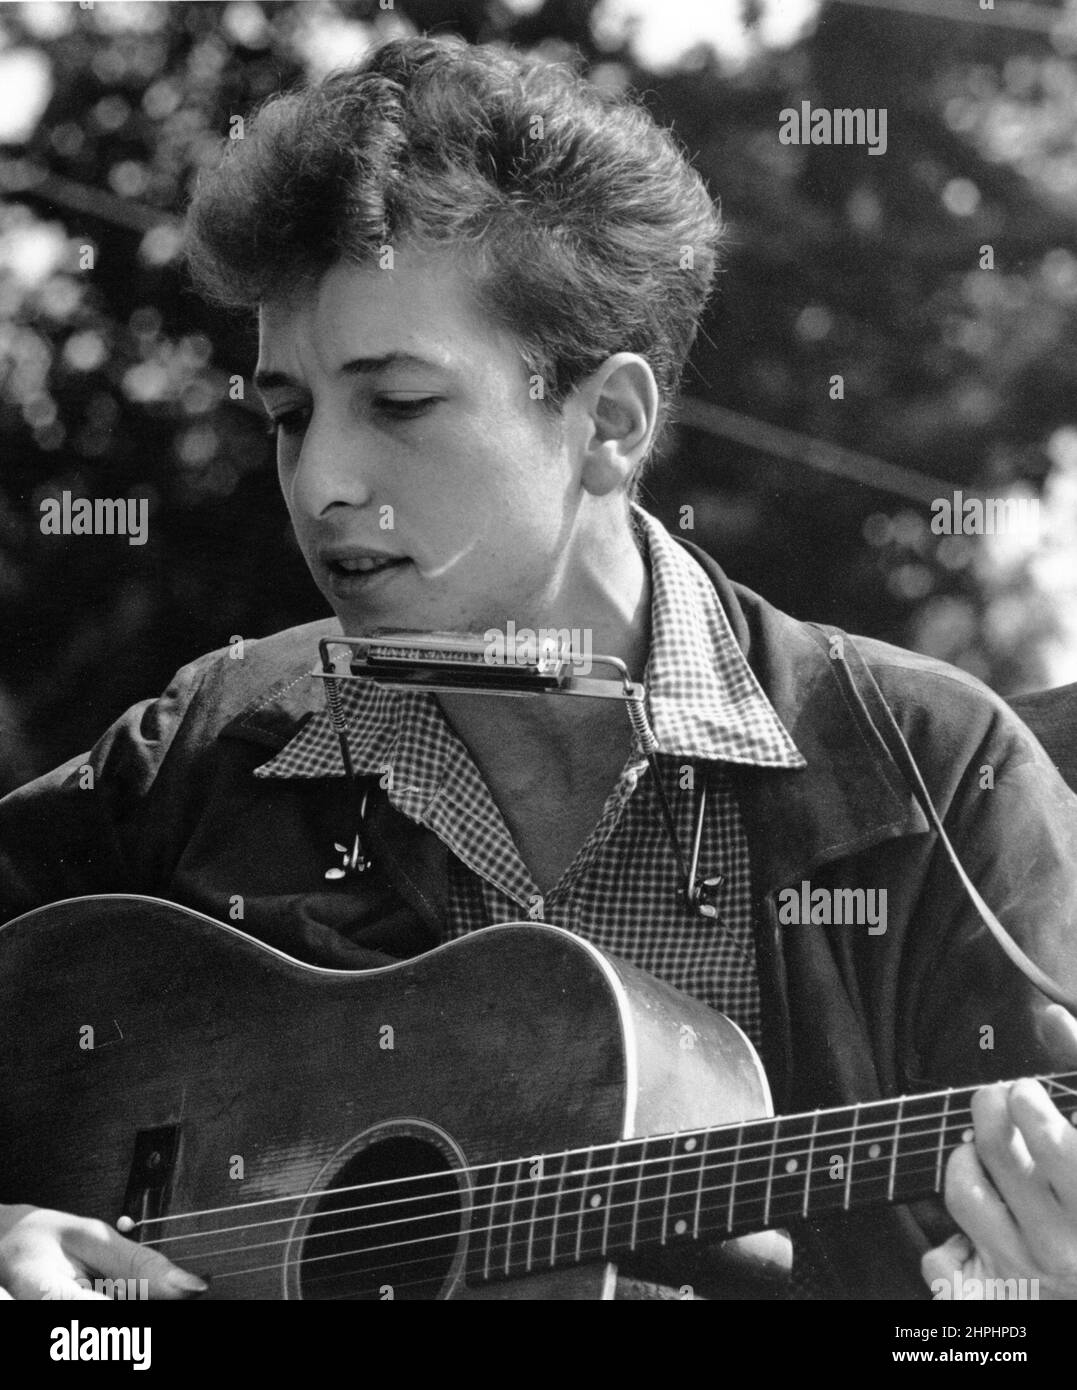 Civil Rights March on Washington, D.C.; close-up view of vocalist Bob Dylan, August 28, 1963 Stock Photo